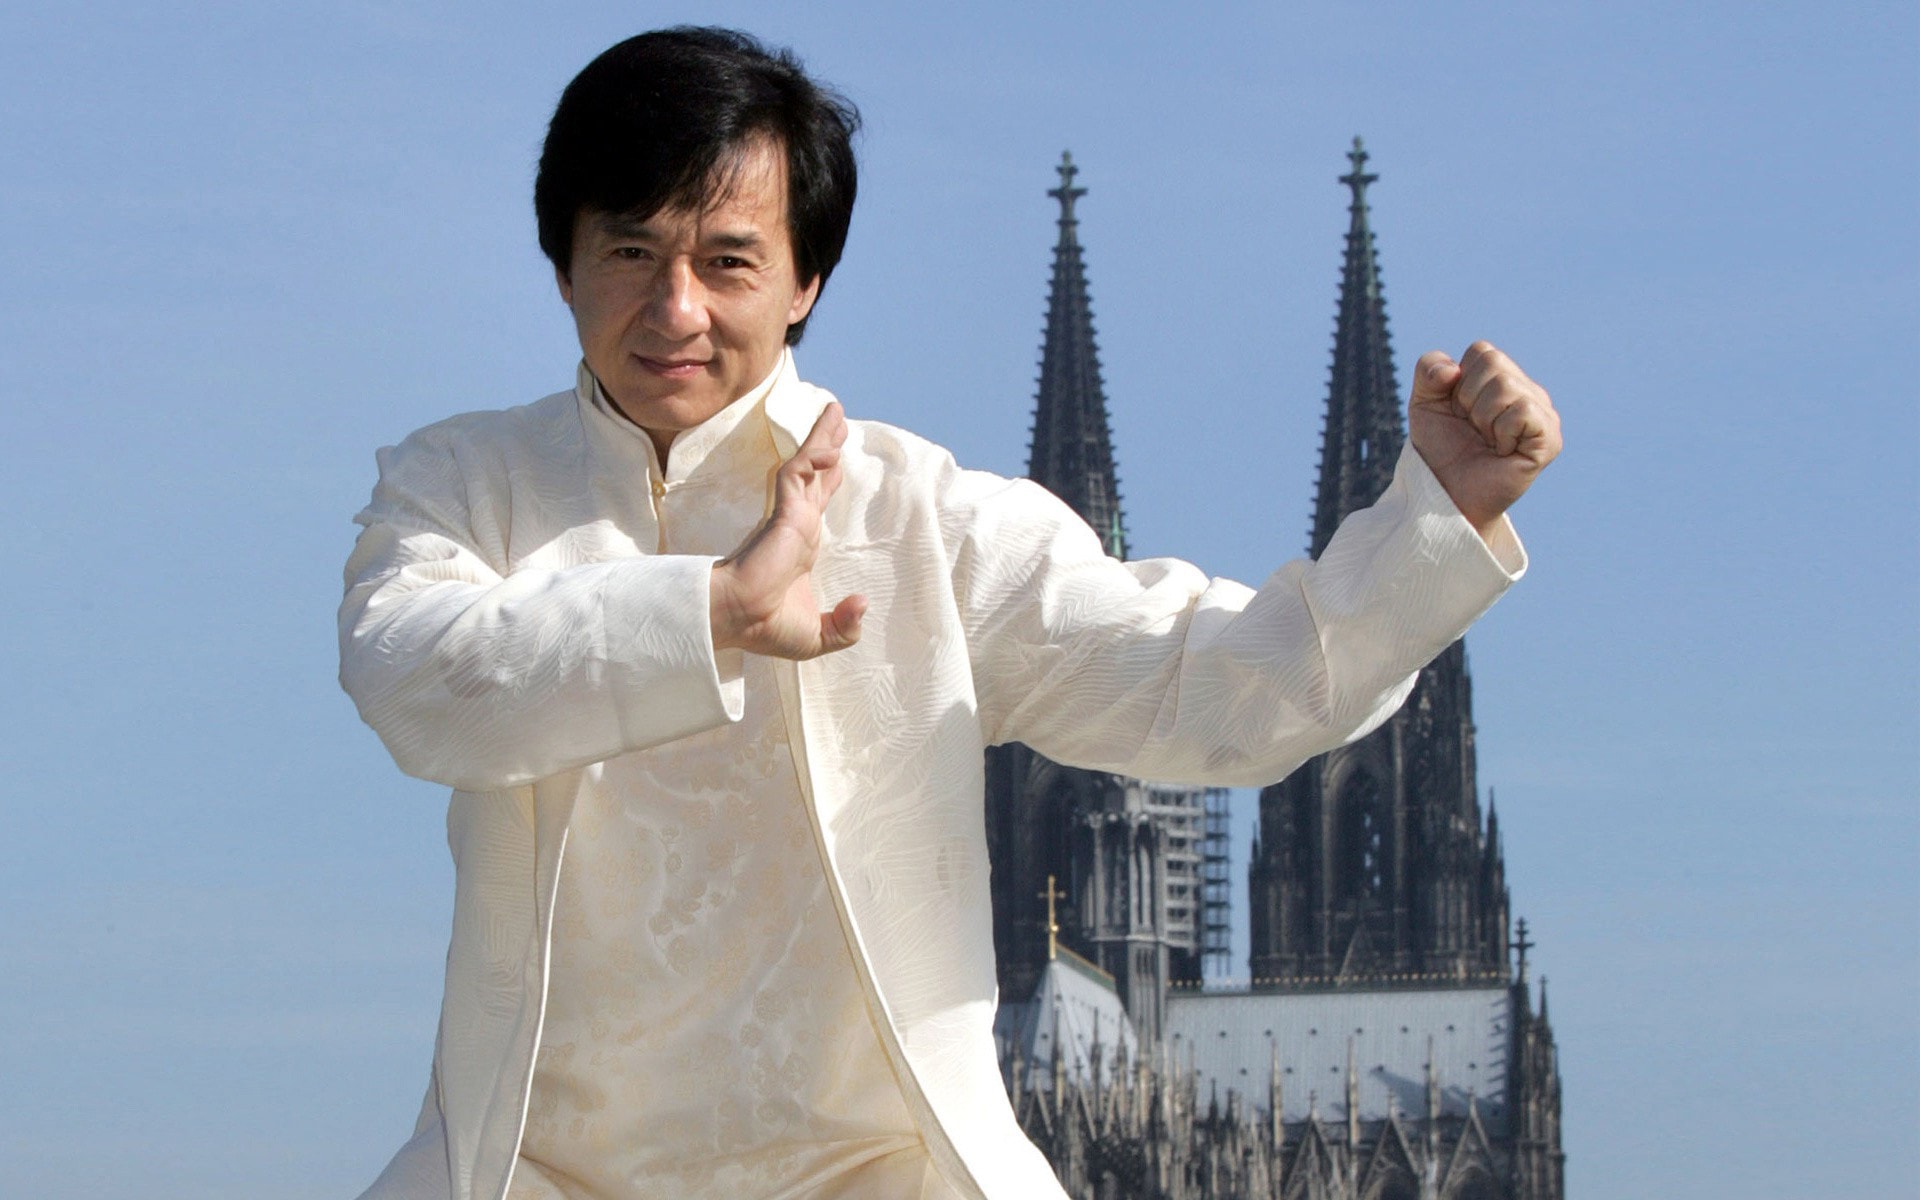 Jackie Chan Arena Pile Top 10 Finest Asian Celebrities In The World Ever